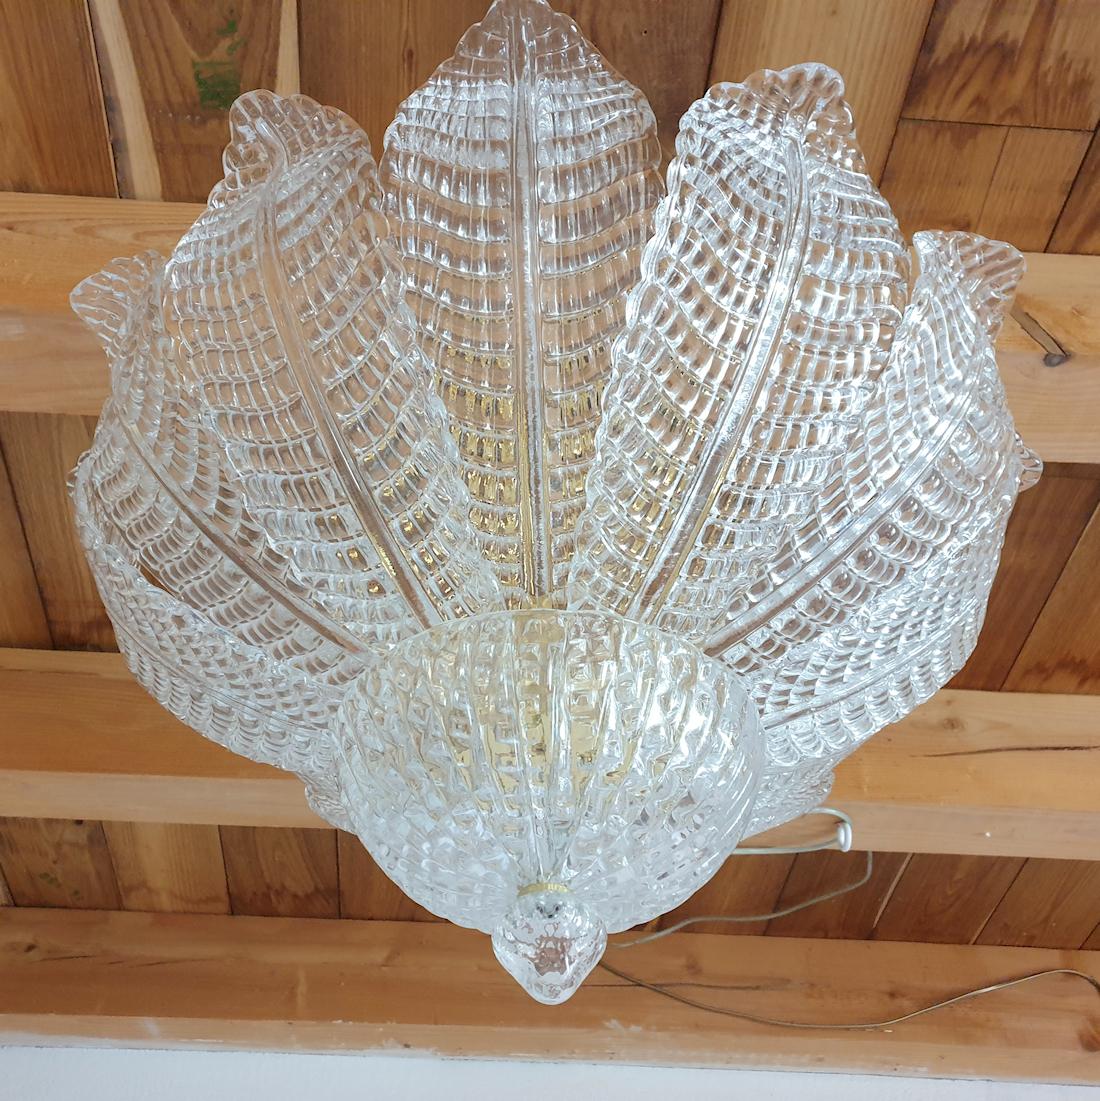 Textured stylized leaves Mid-Century Modern murano glass flush-mount chandelier, Barovier & Toso style, Italy late 1970s.
The Murano glass leaves are translucent, with a grid pattern and a beautiful thickness.
The Vintage Italian chandelier has a